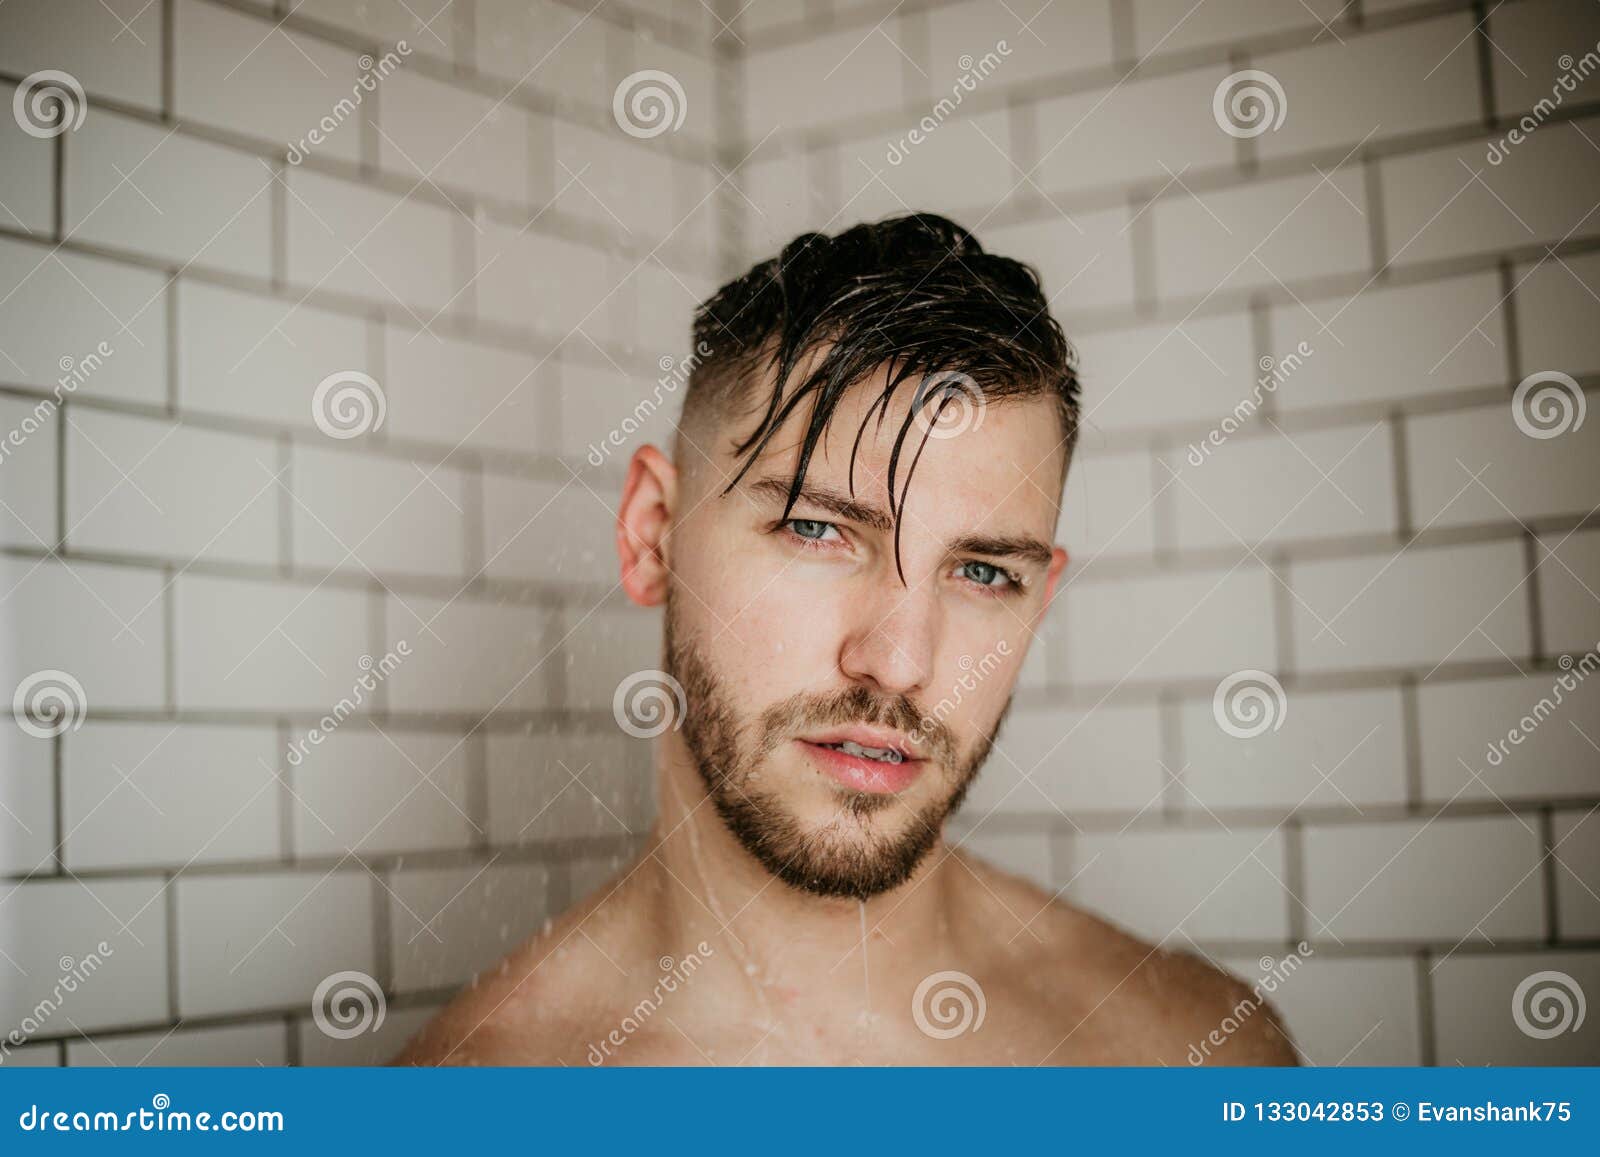 Young Attractive Male Model Washing Hair in Trendy Modern Subway Tile Wet  Shower Stock Image - Image of face, hair: 133042853